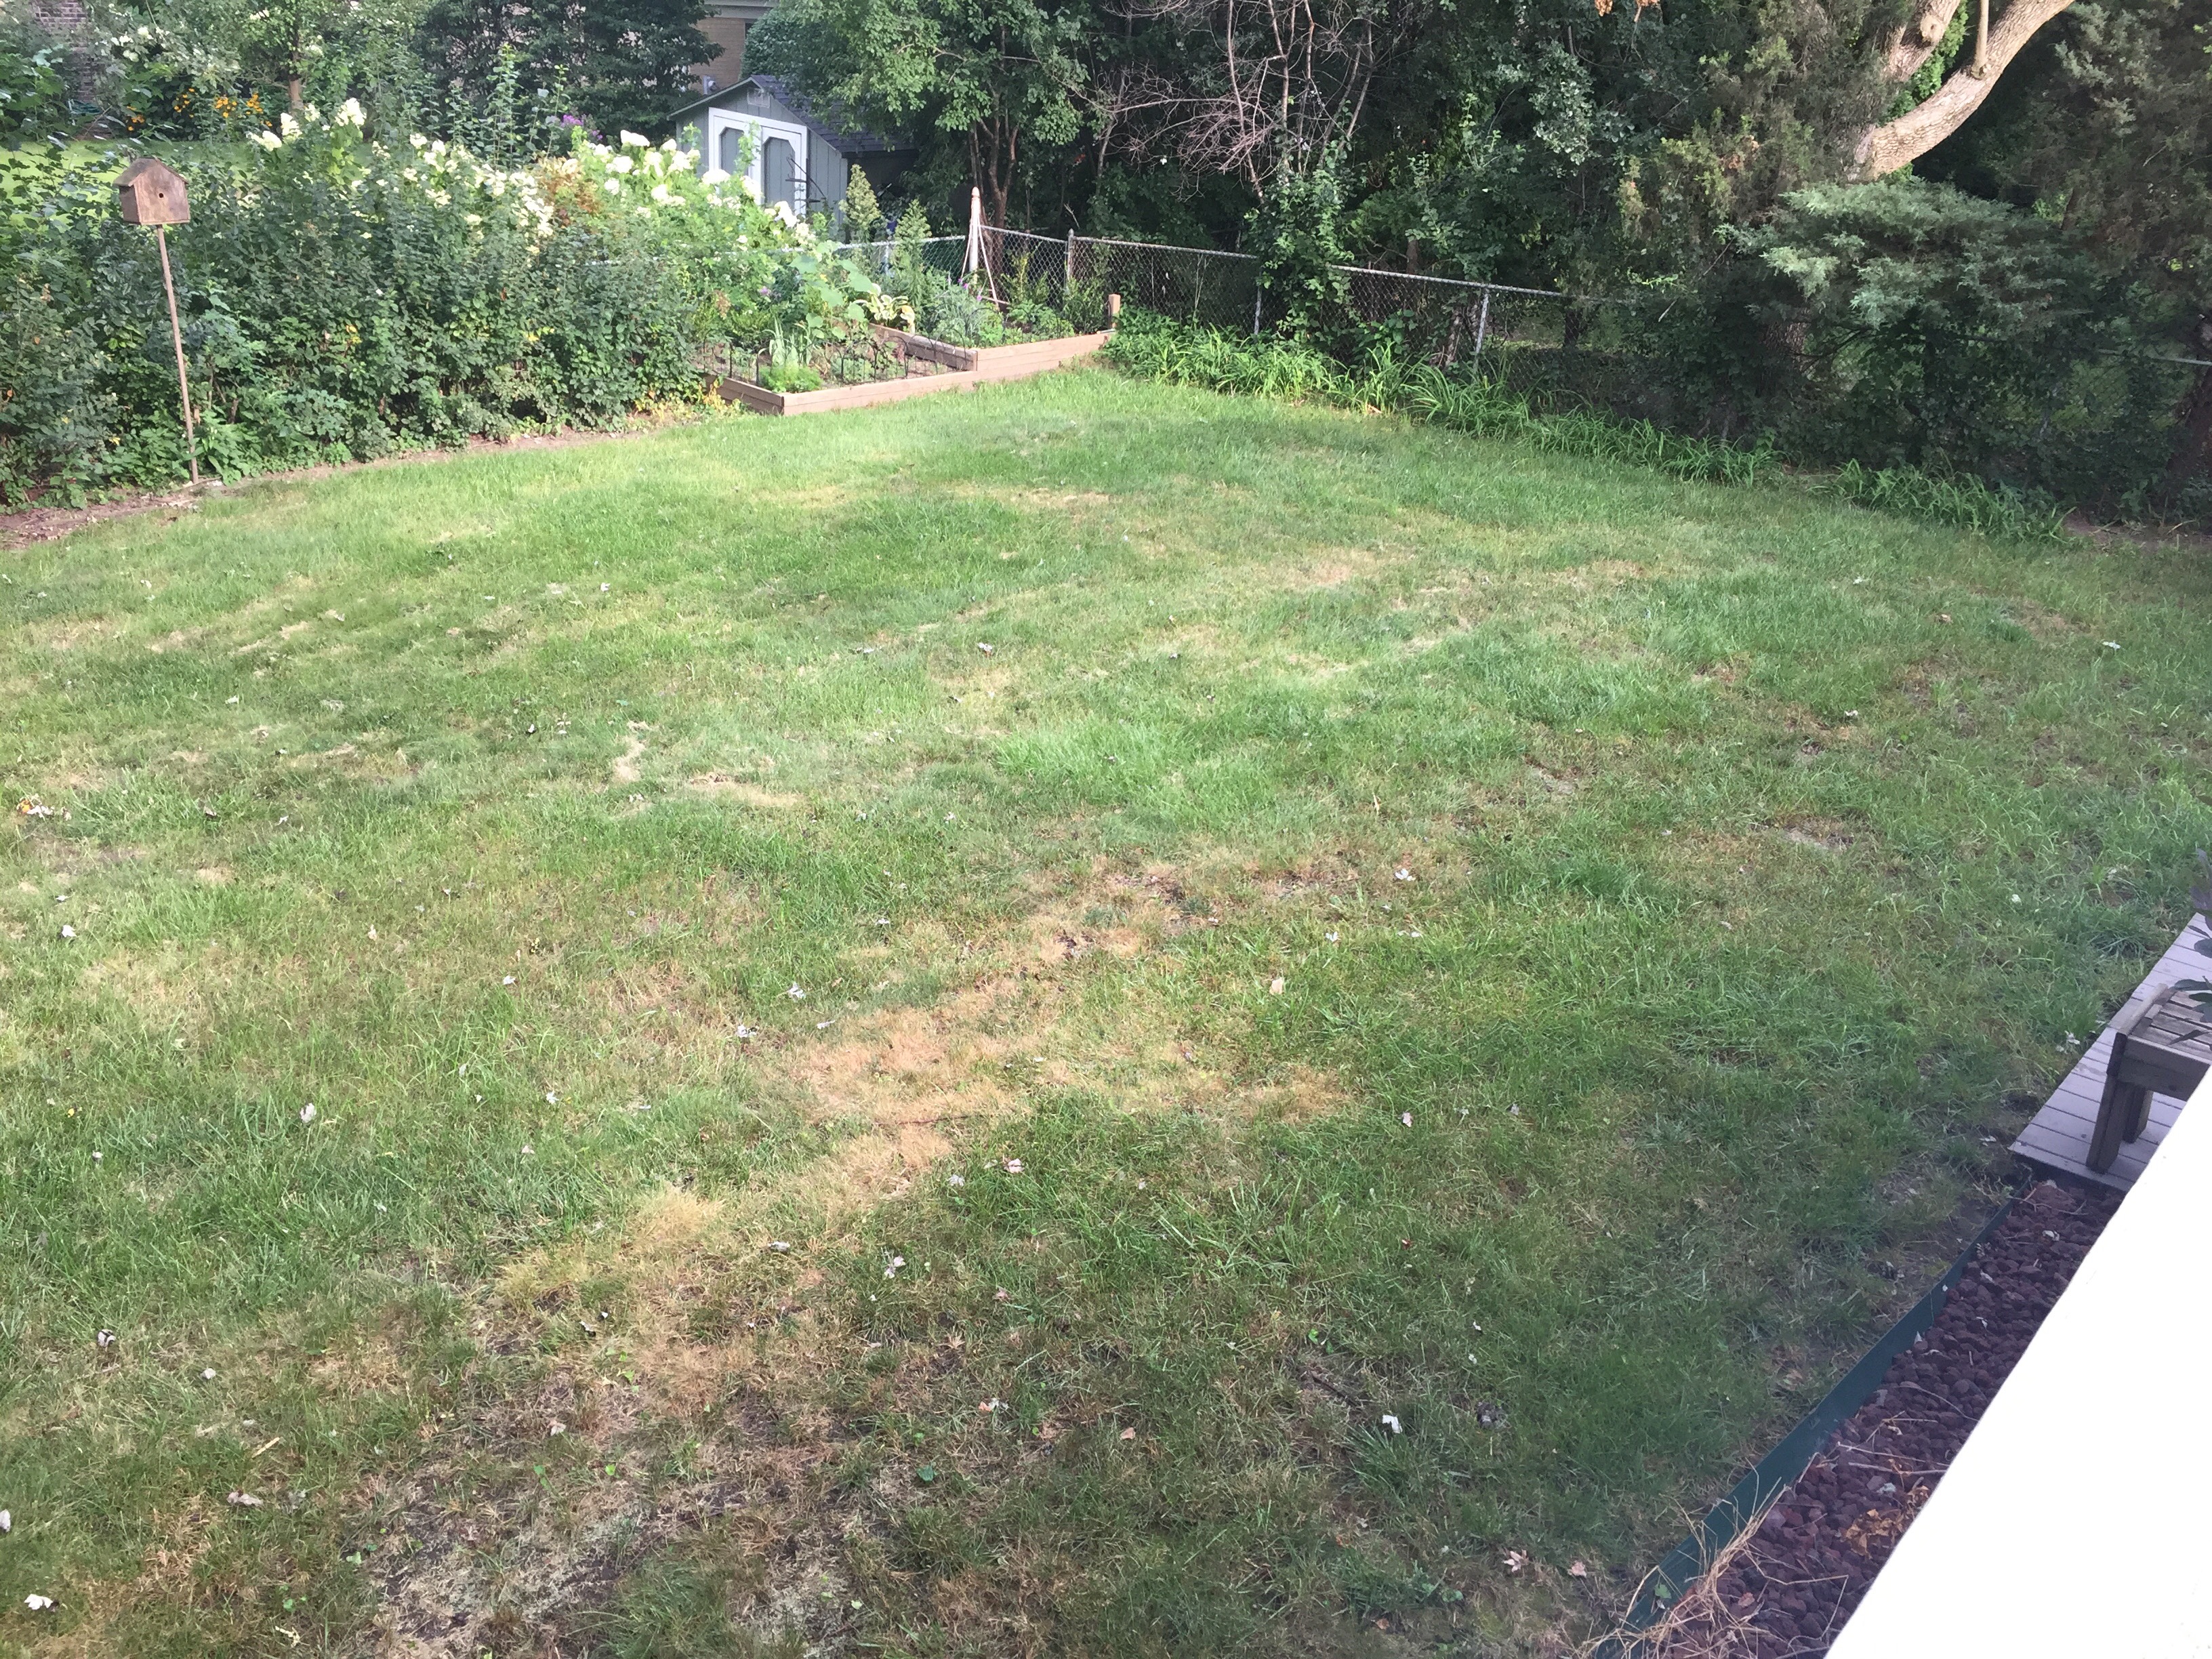 Weedman killed my lawn - check it out